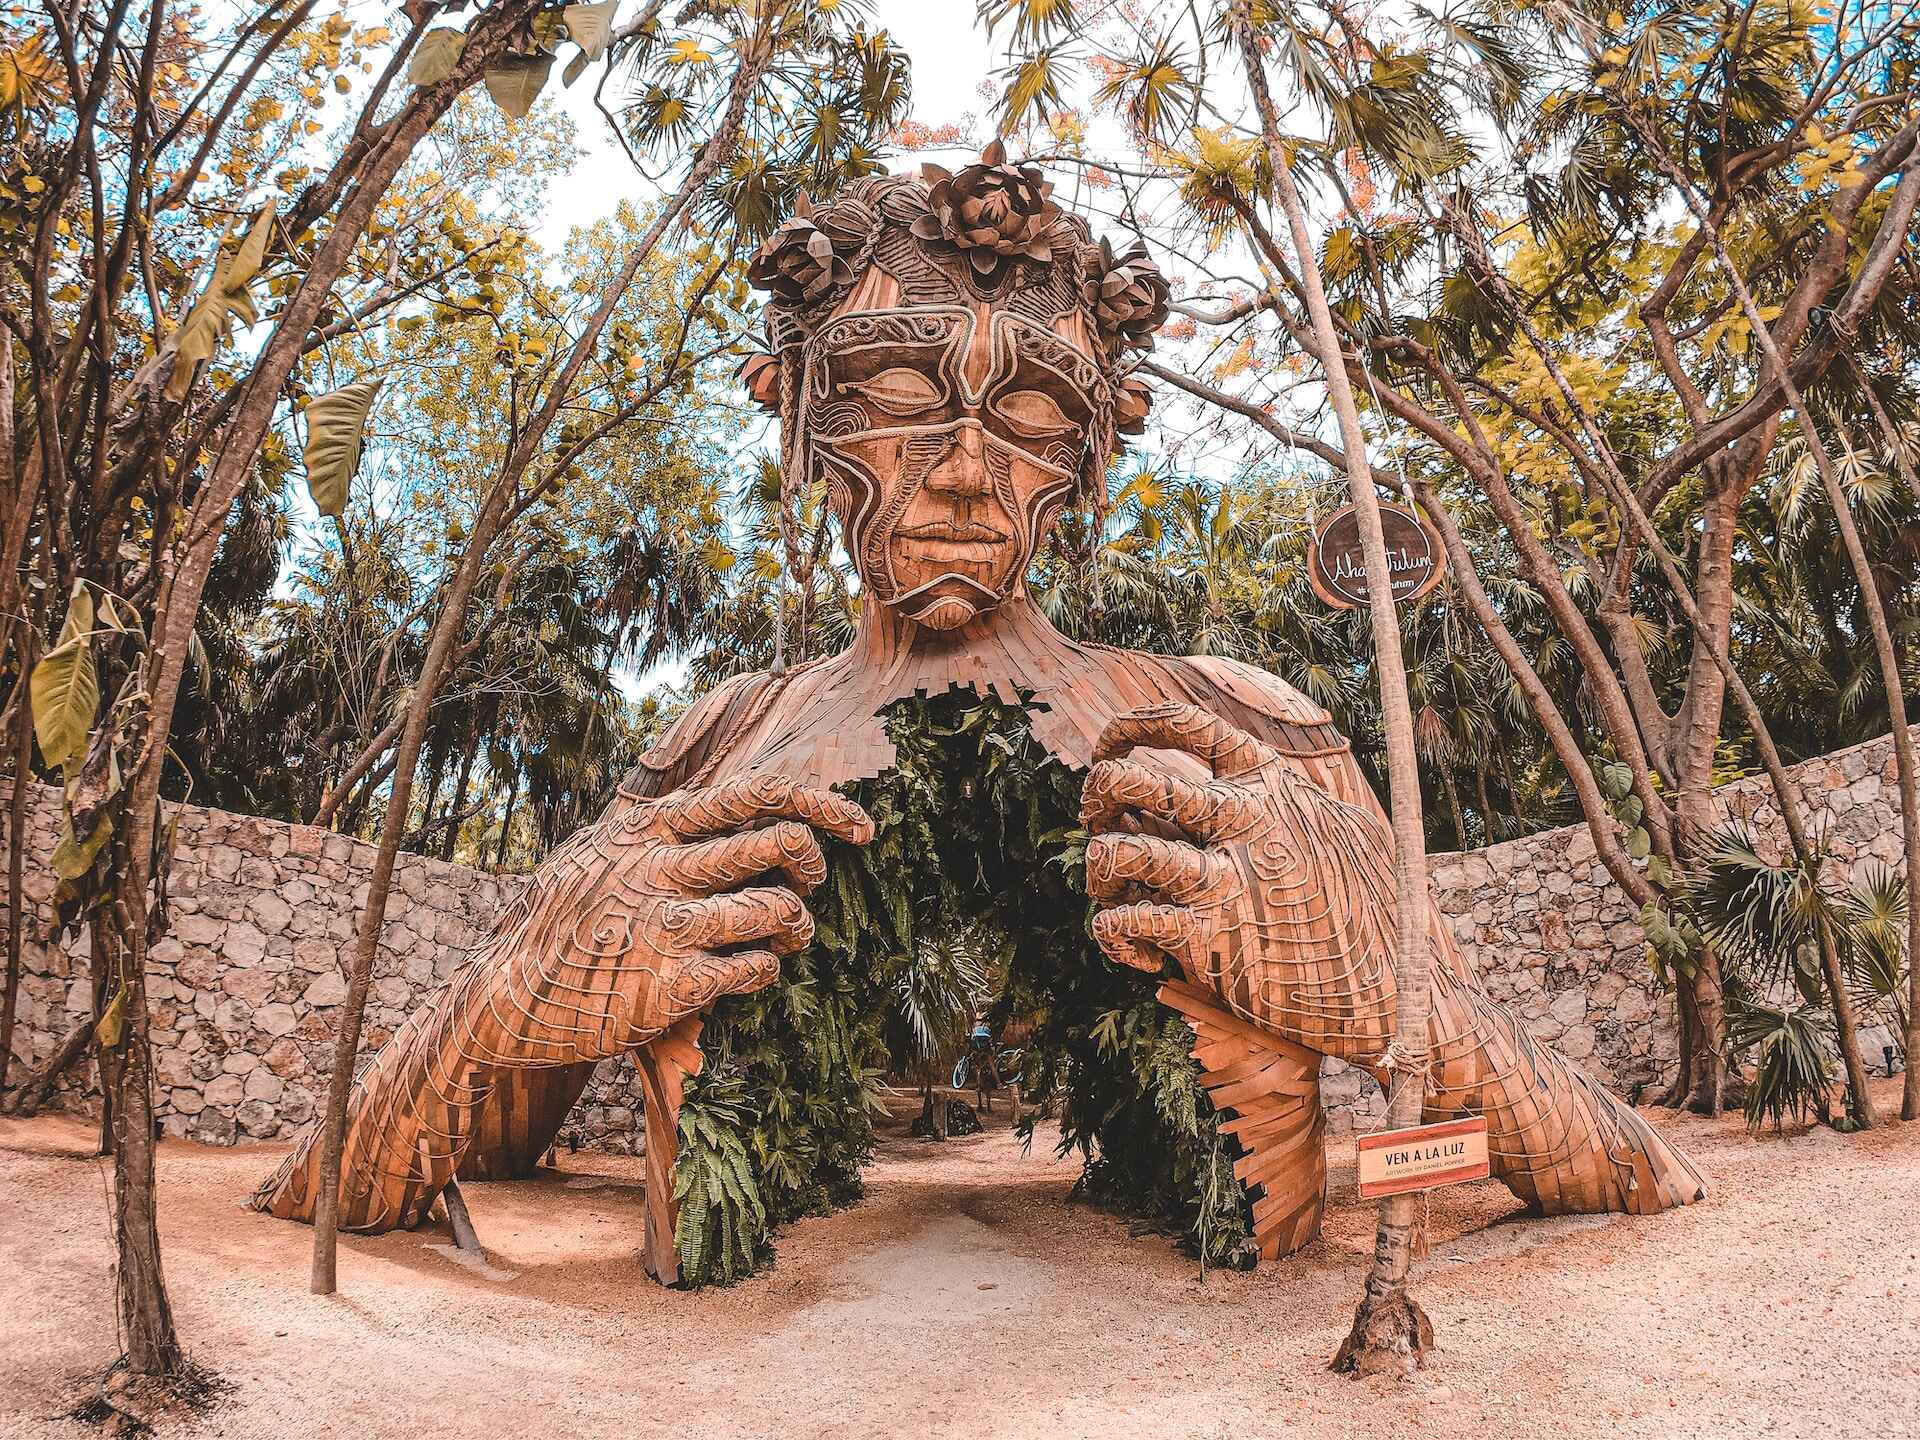 A wooden statue in Tulum.